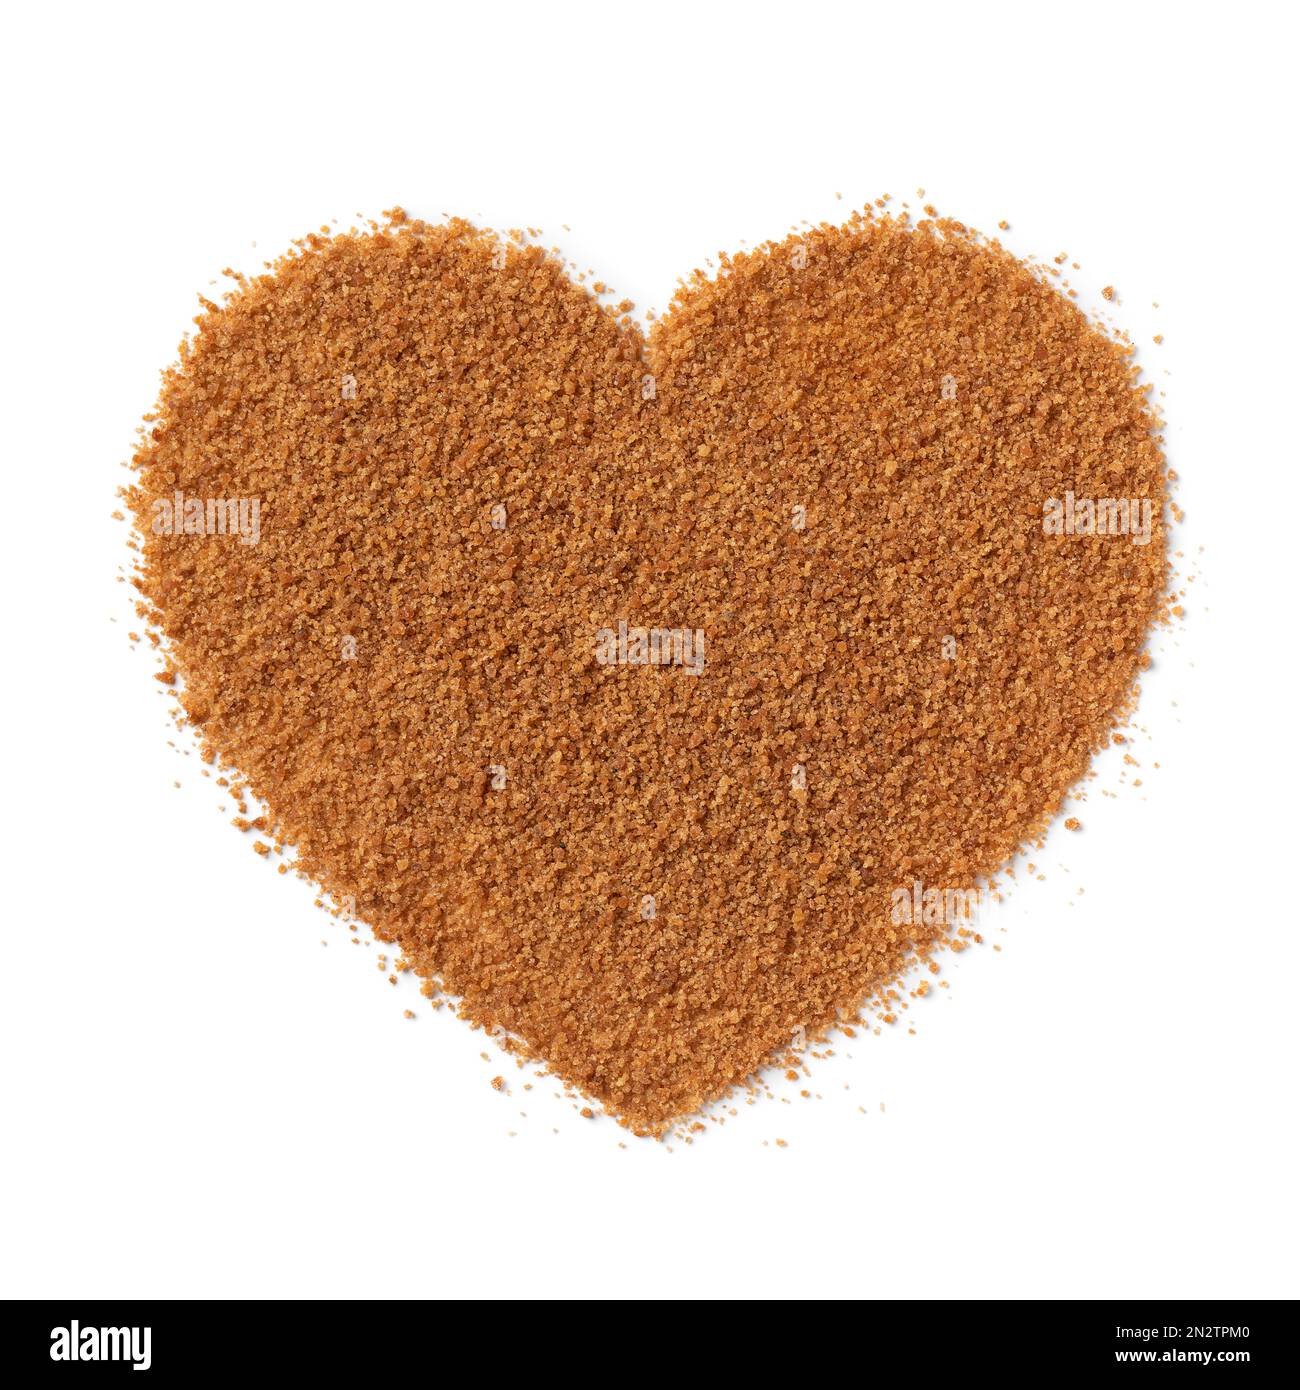 Golden palm sugar in heart shape isolated on white background close up Stock Photo